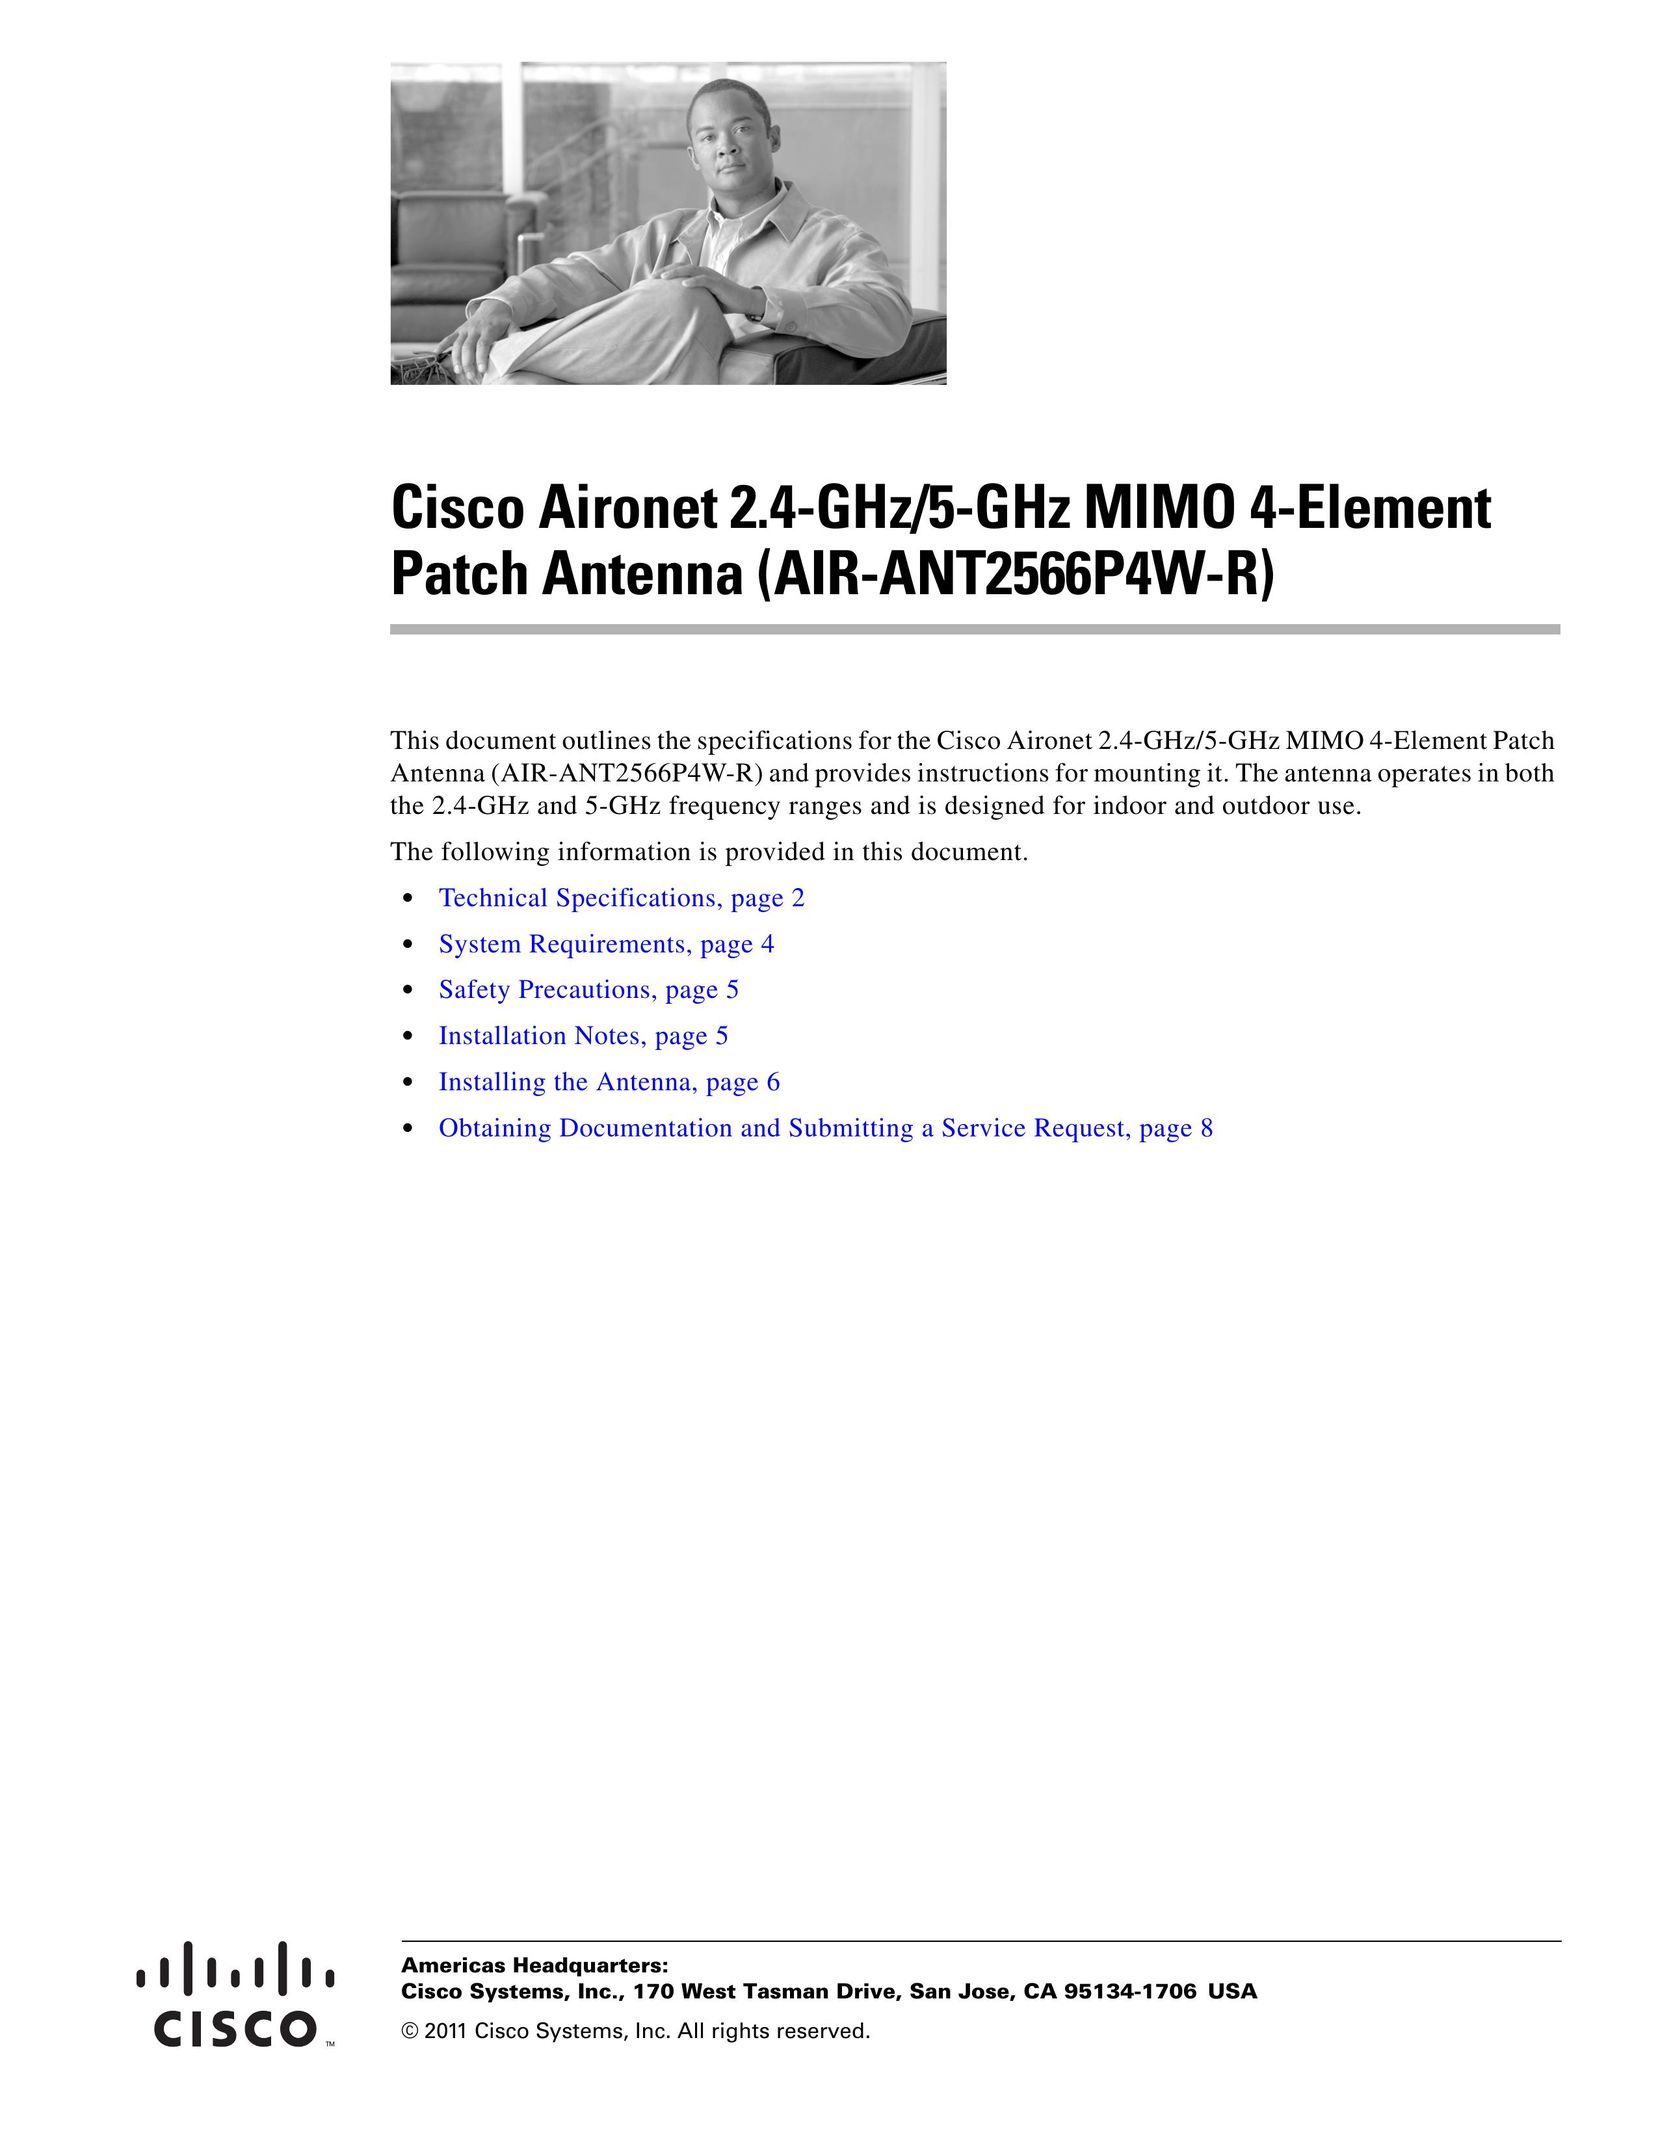 Cisco Systems AIRANT2566P4WR Router User Manual